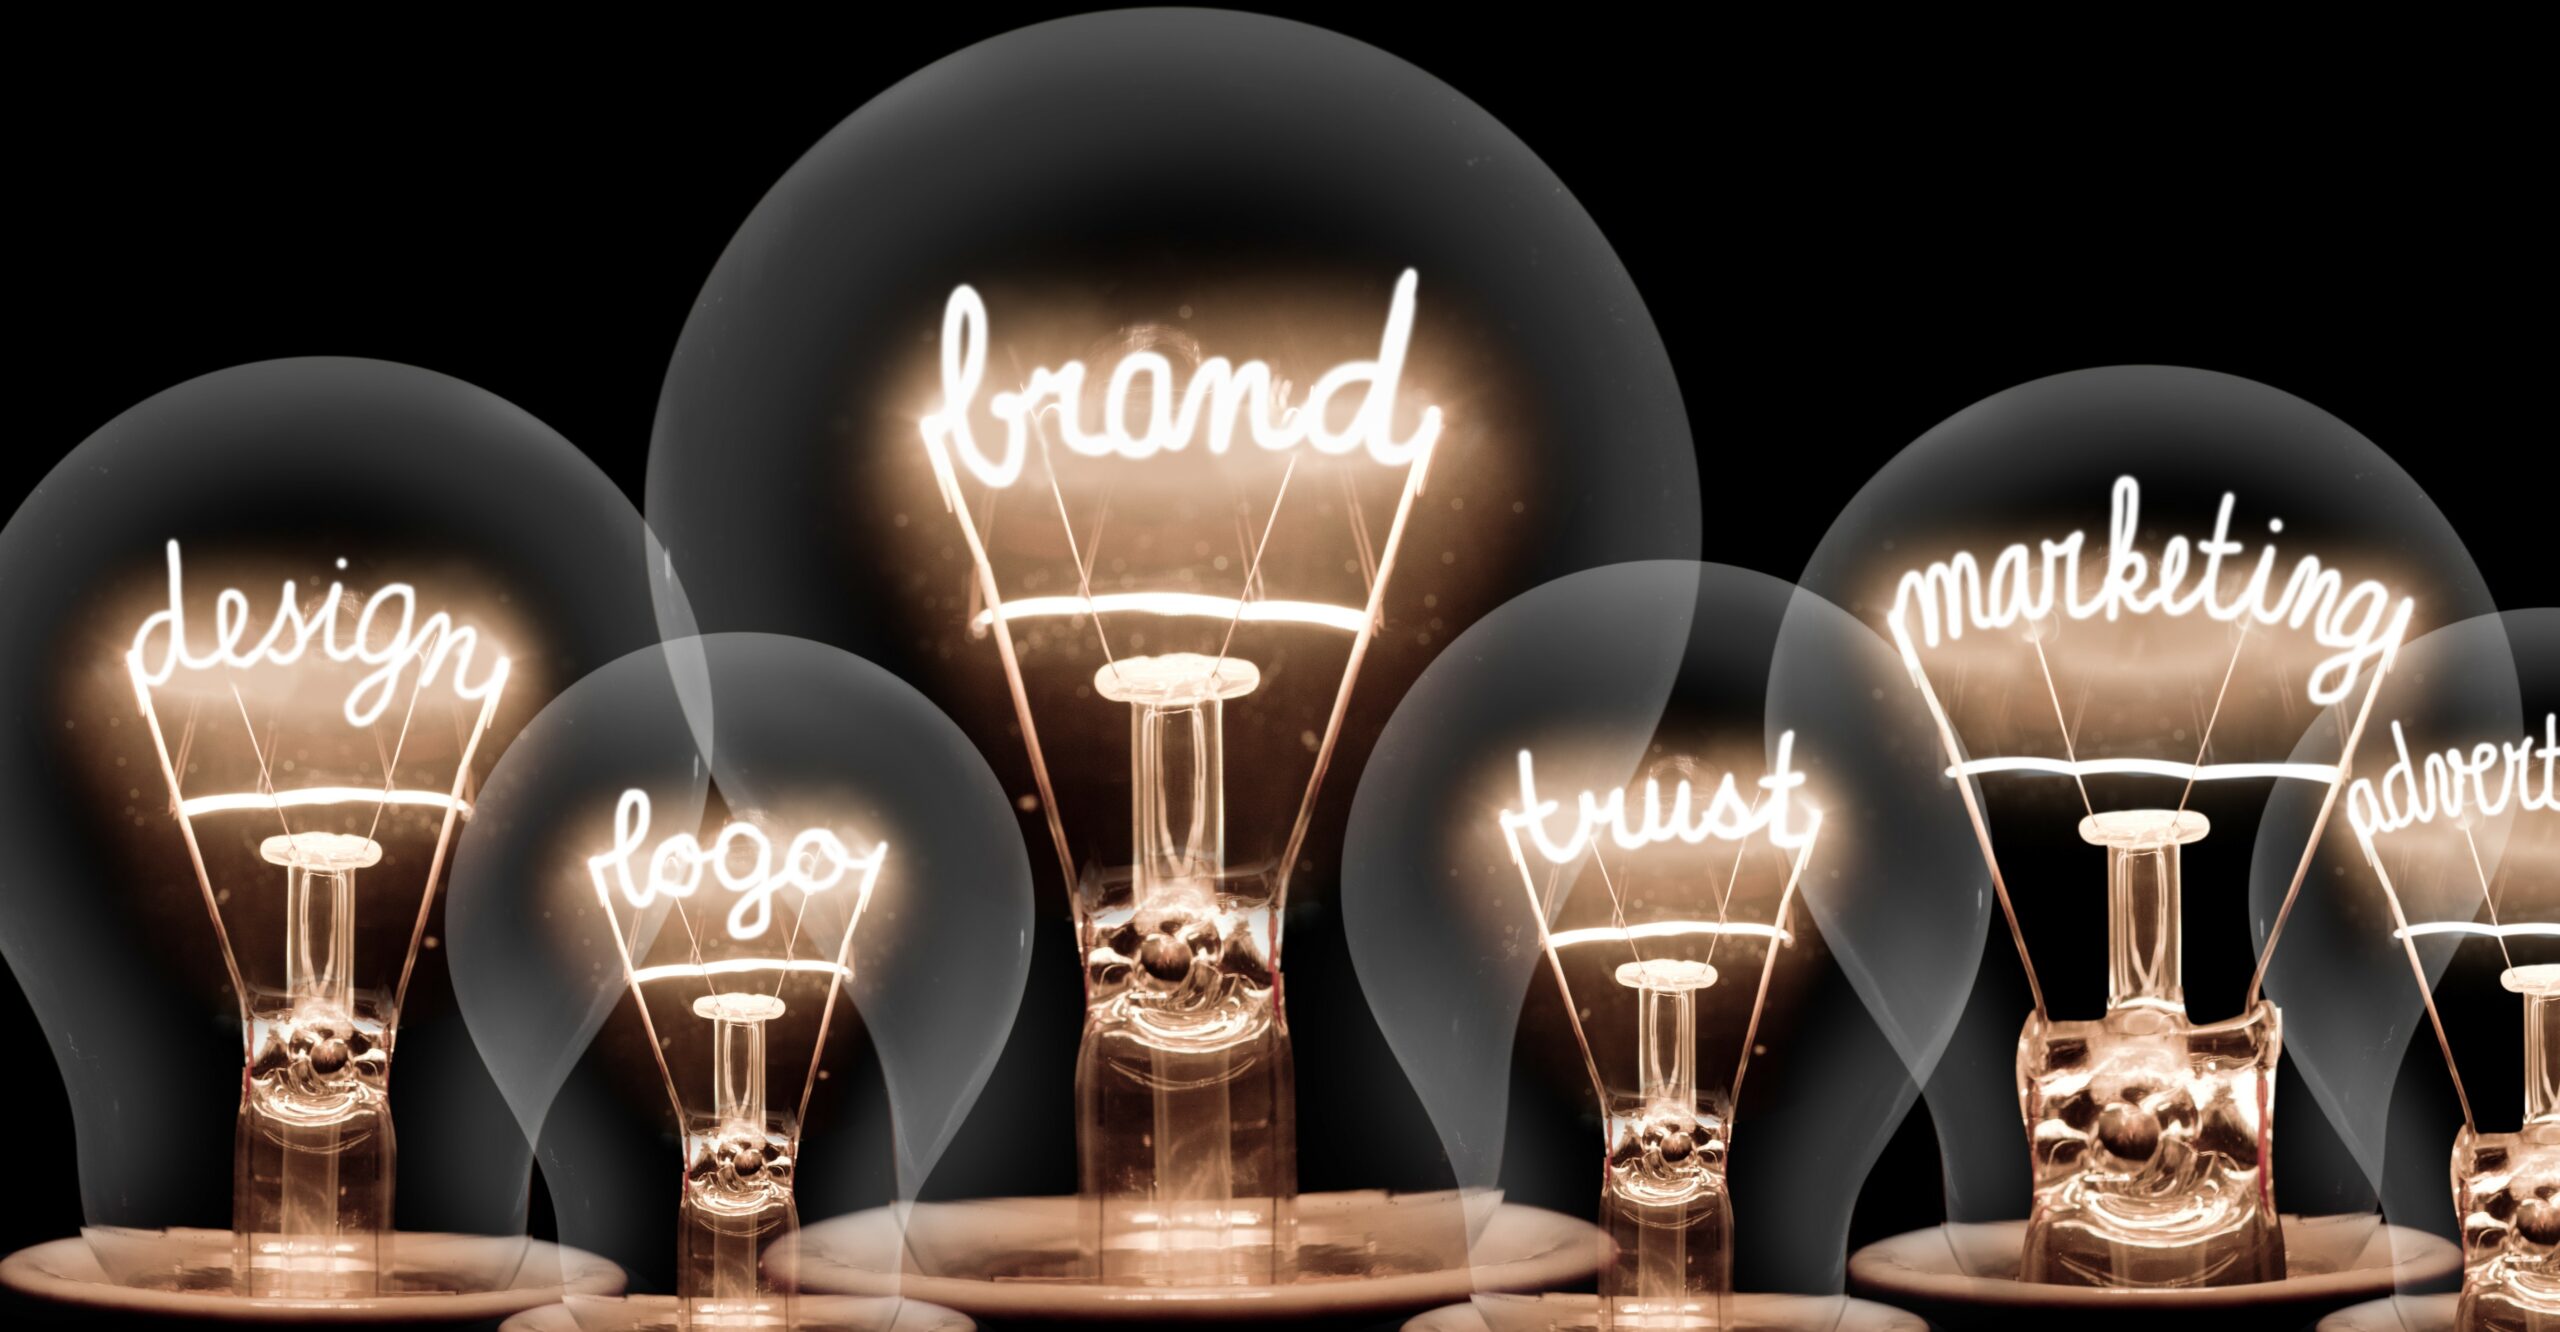 A row of lightbulbs displaying various brand related words